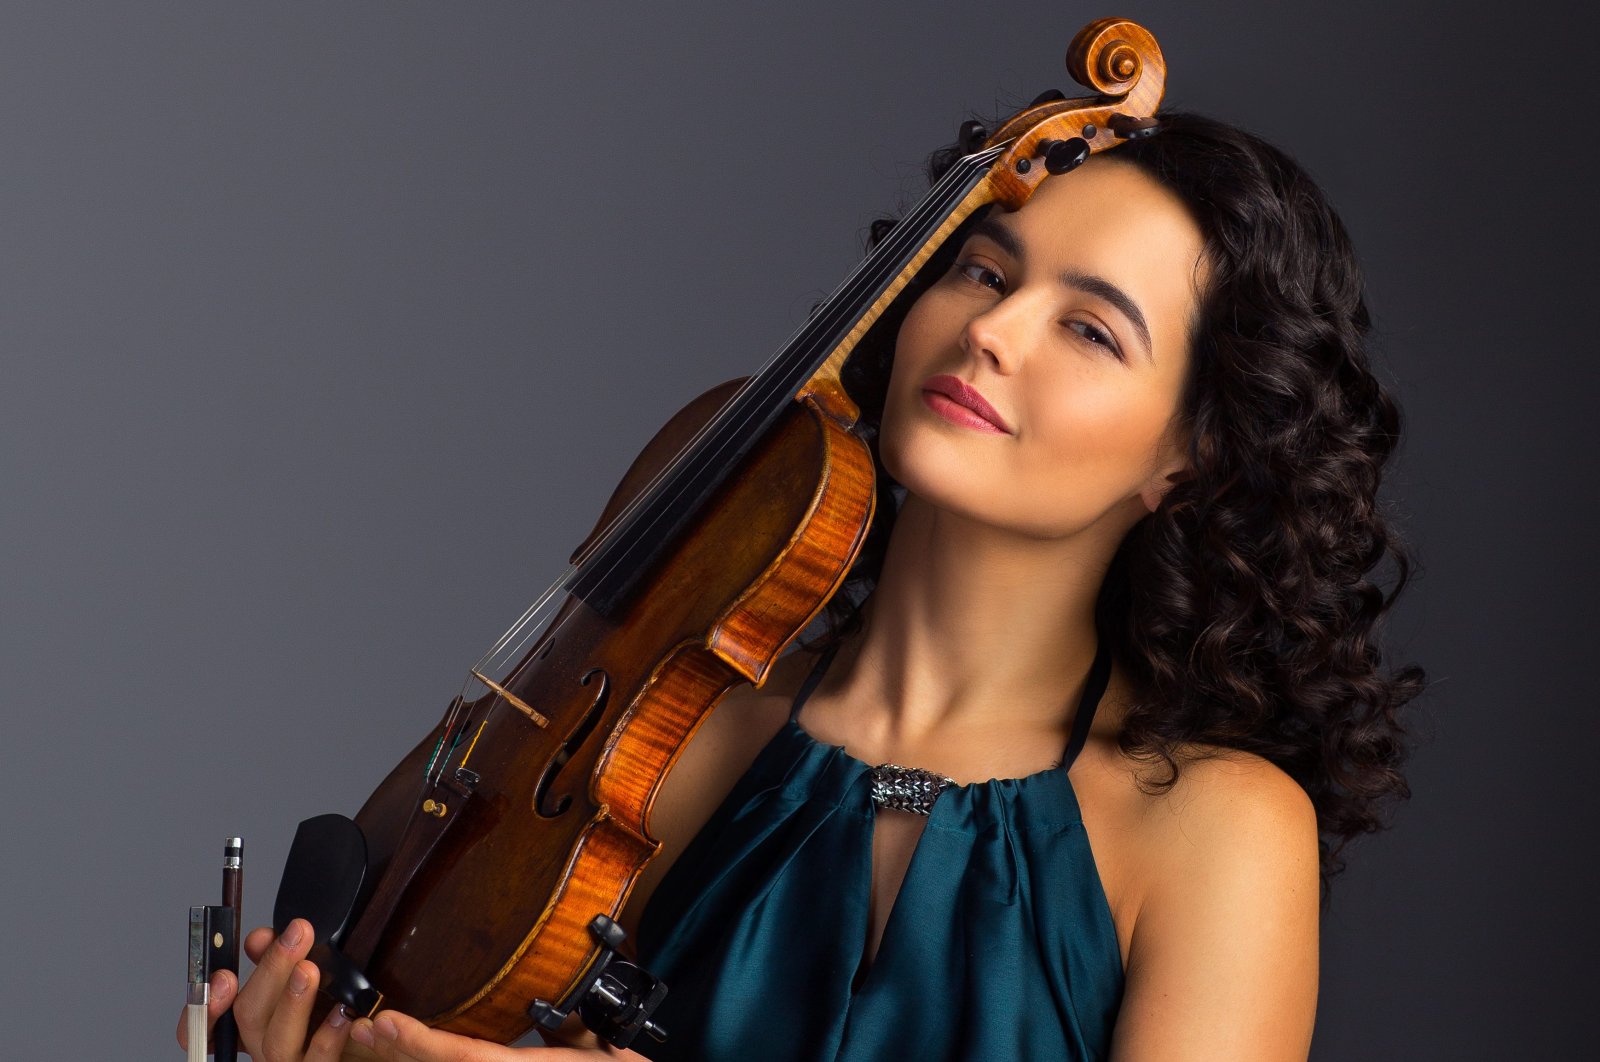 Alena Baeva has won Grand Prix in many international violin competitions to date. (Courtesy of CRR Concert Hall)